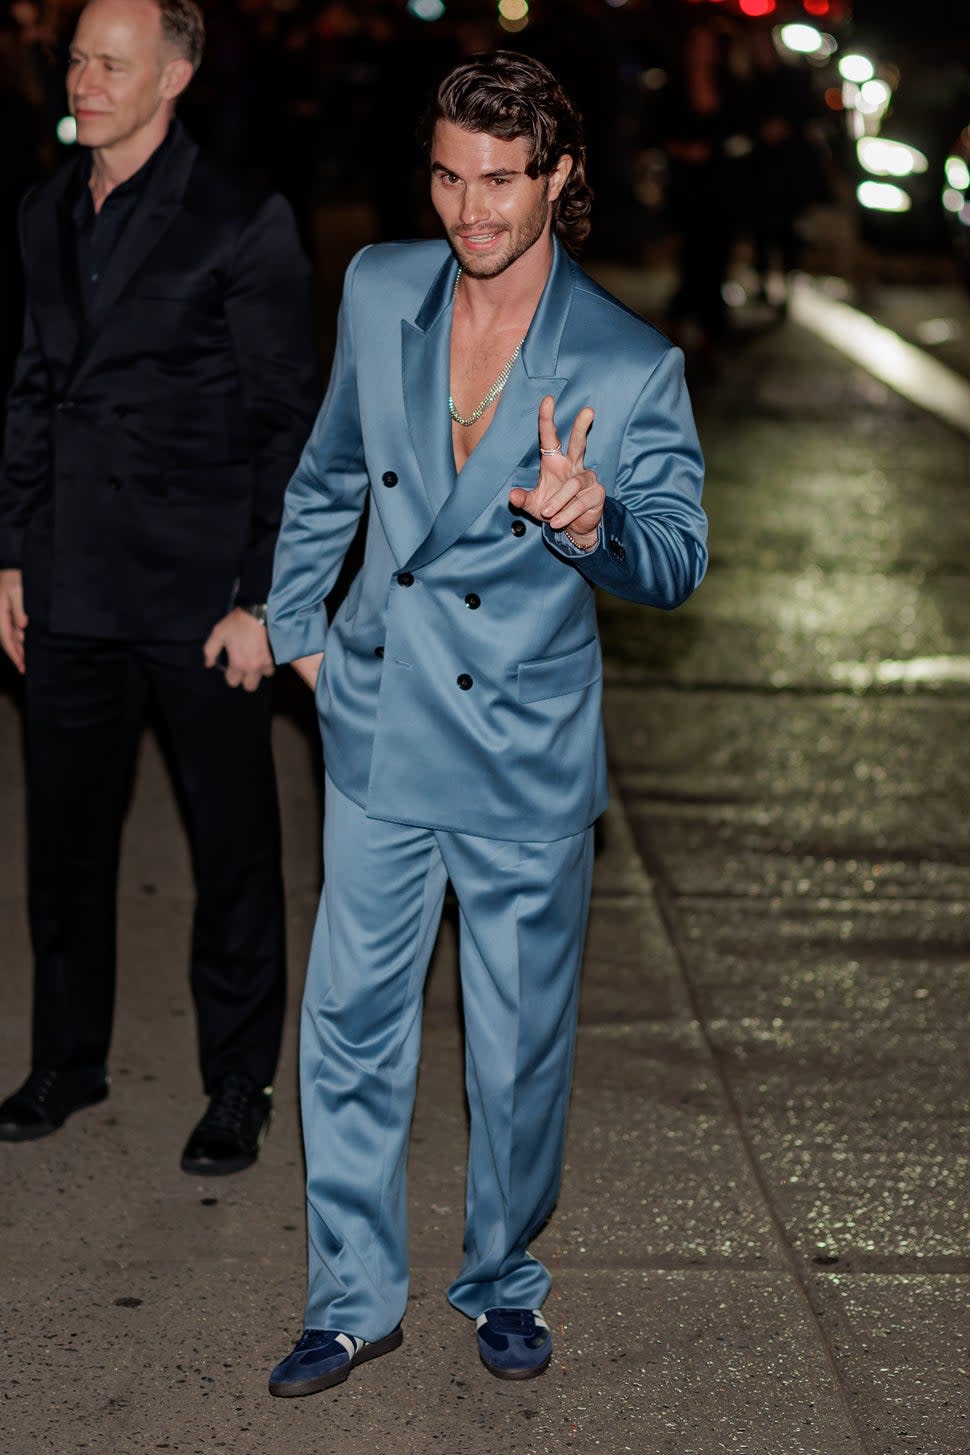 NEW YORK, NEW YORK - NOVEMBER 06: Chase Stokes is seen arriving to the 2023 CFDA Awards at the Museum of Natural History on November 06, 2023 in New York City